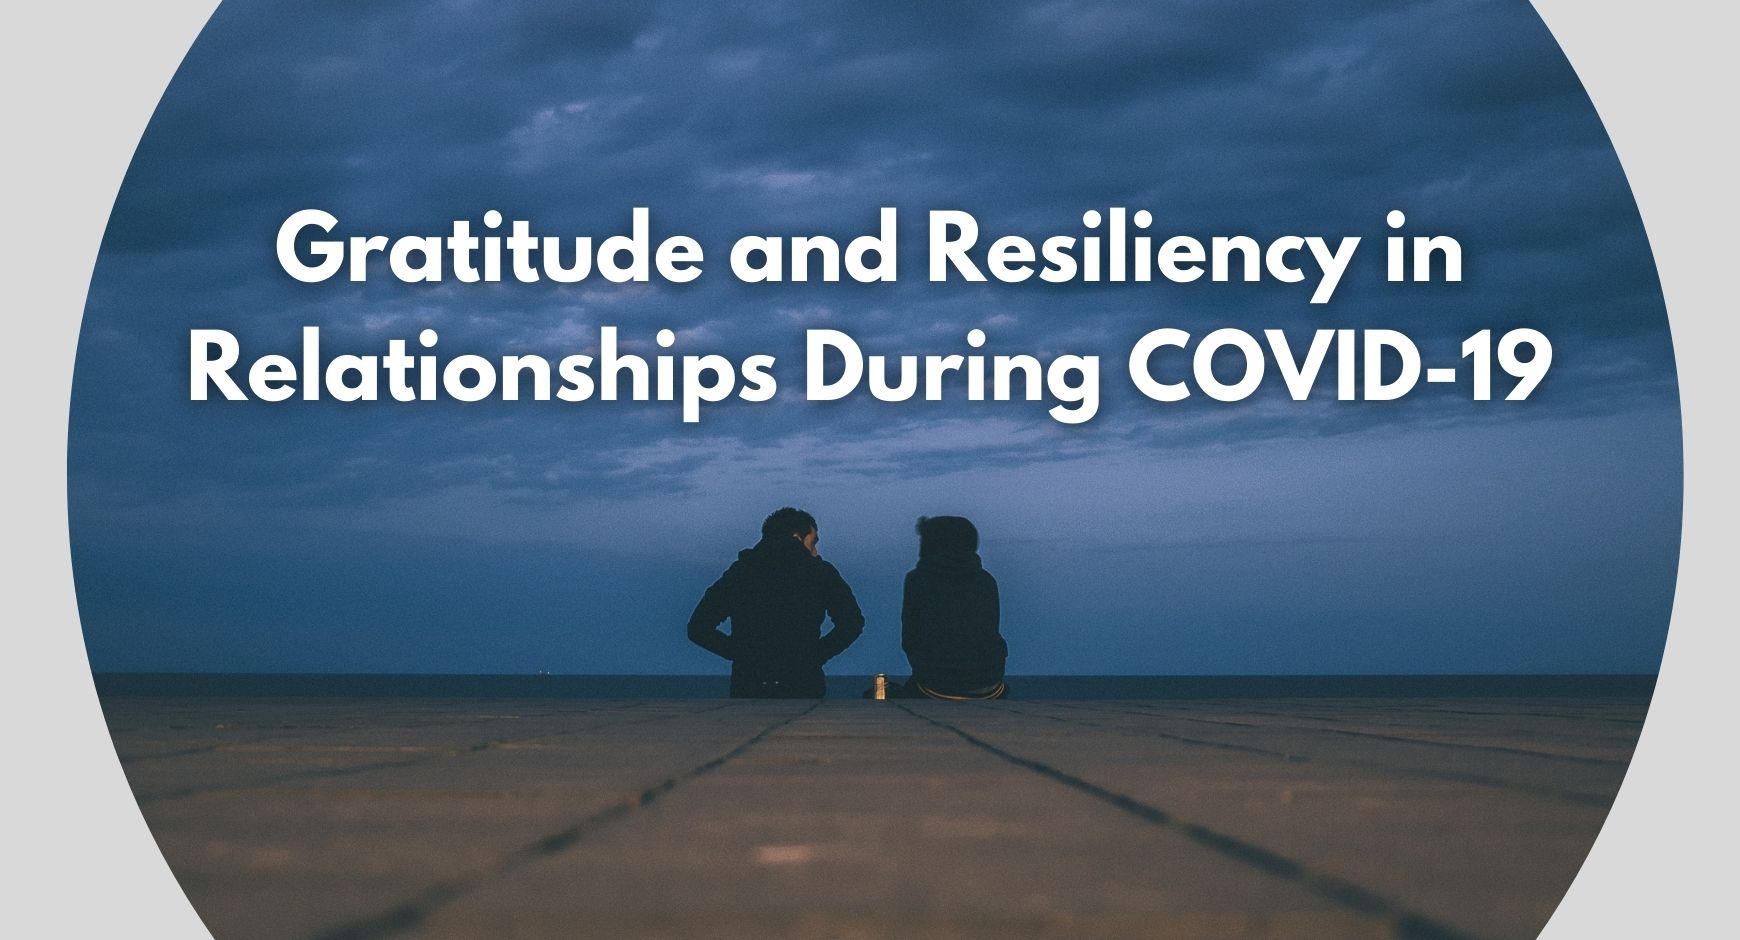 Two people sitting on a bay under clouds and text that reads "Gratitude and Resiliency in Relationships During COVID-19"